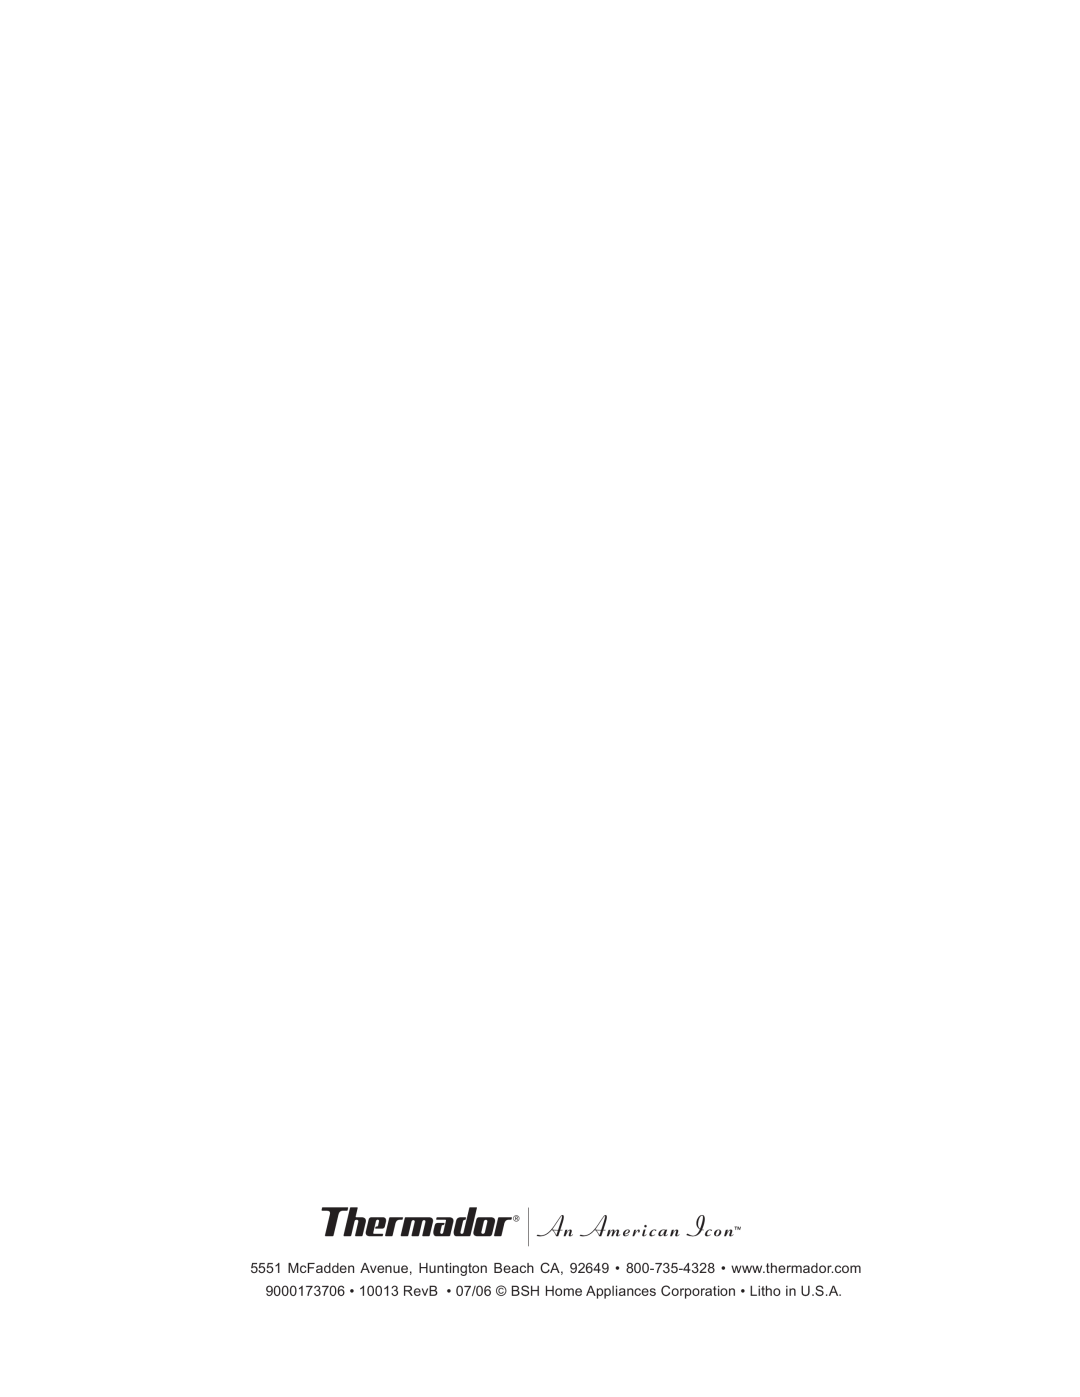 Thermador HDDW 36DS installation manual 